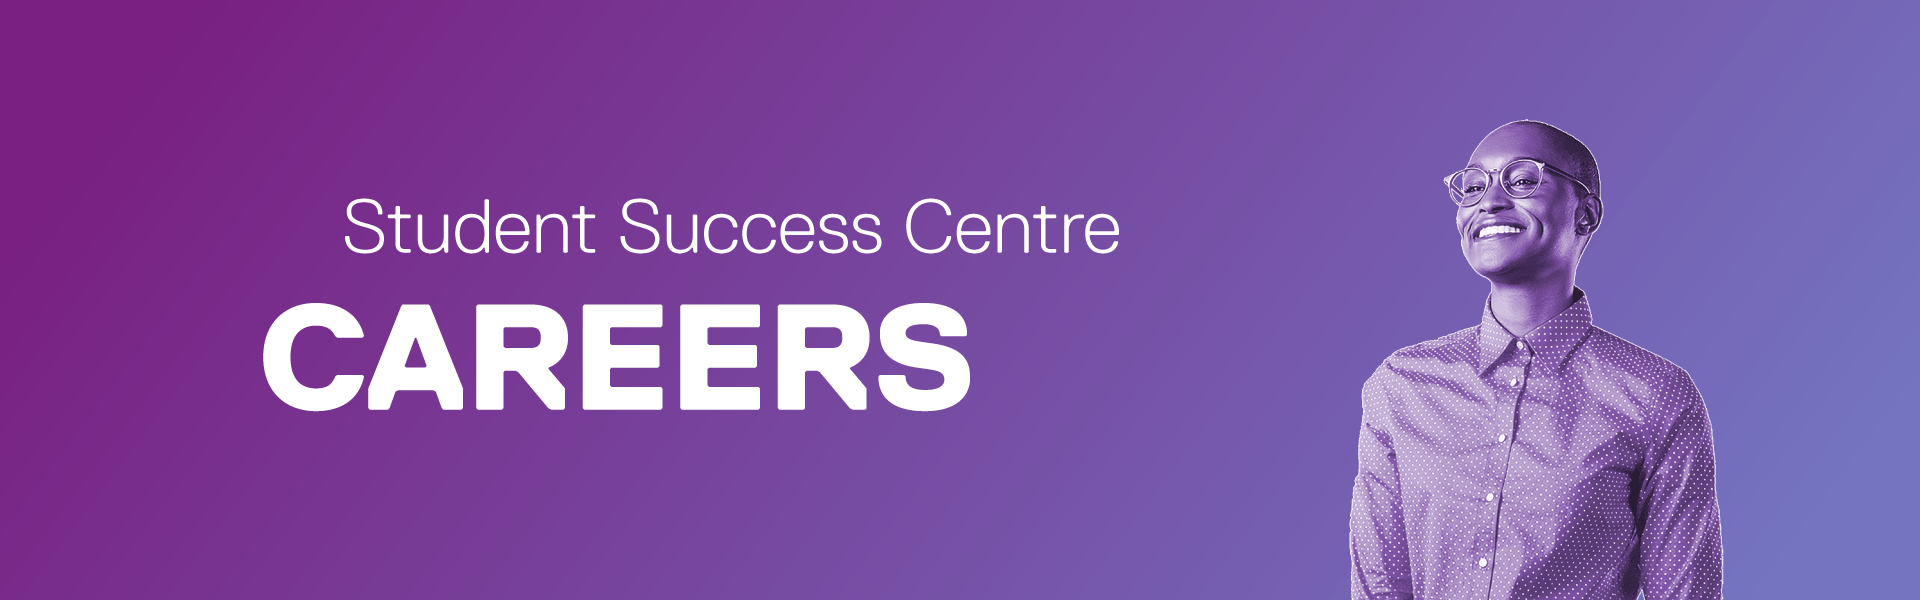 Student Success Centre Careers is written on a purple gradient with a woman standing on the right